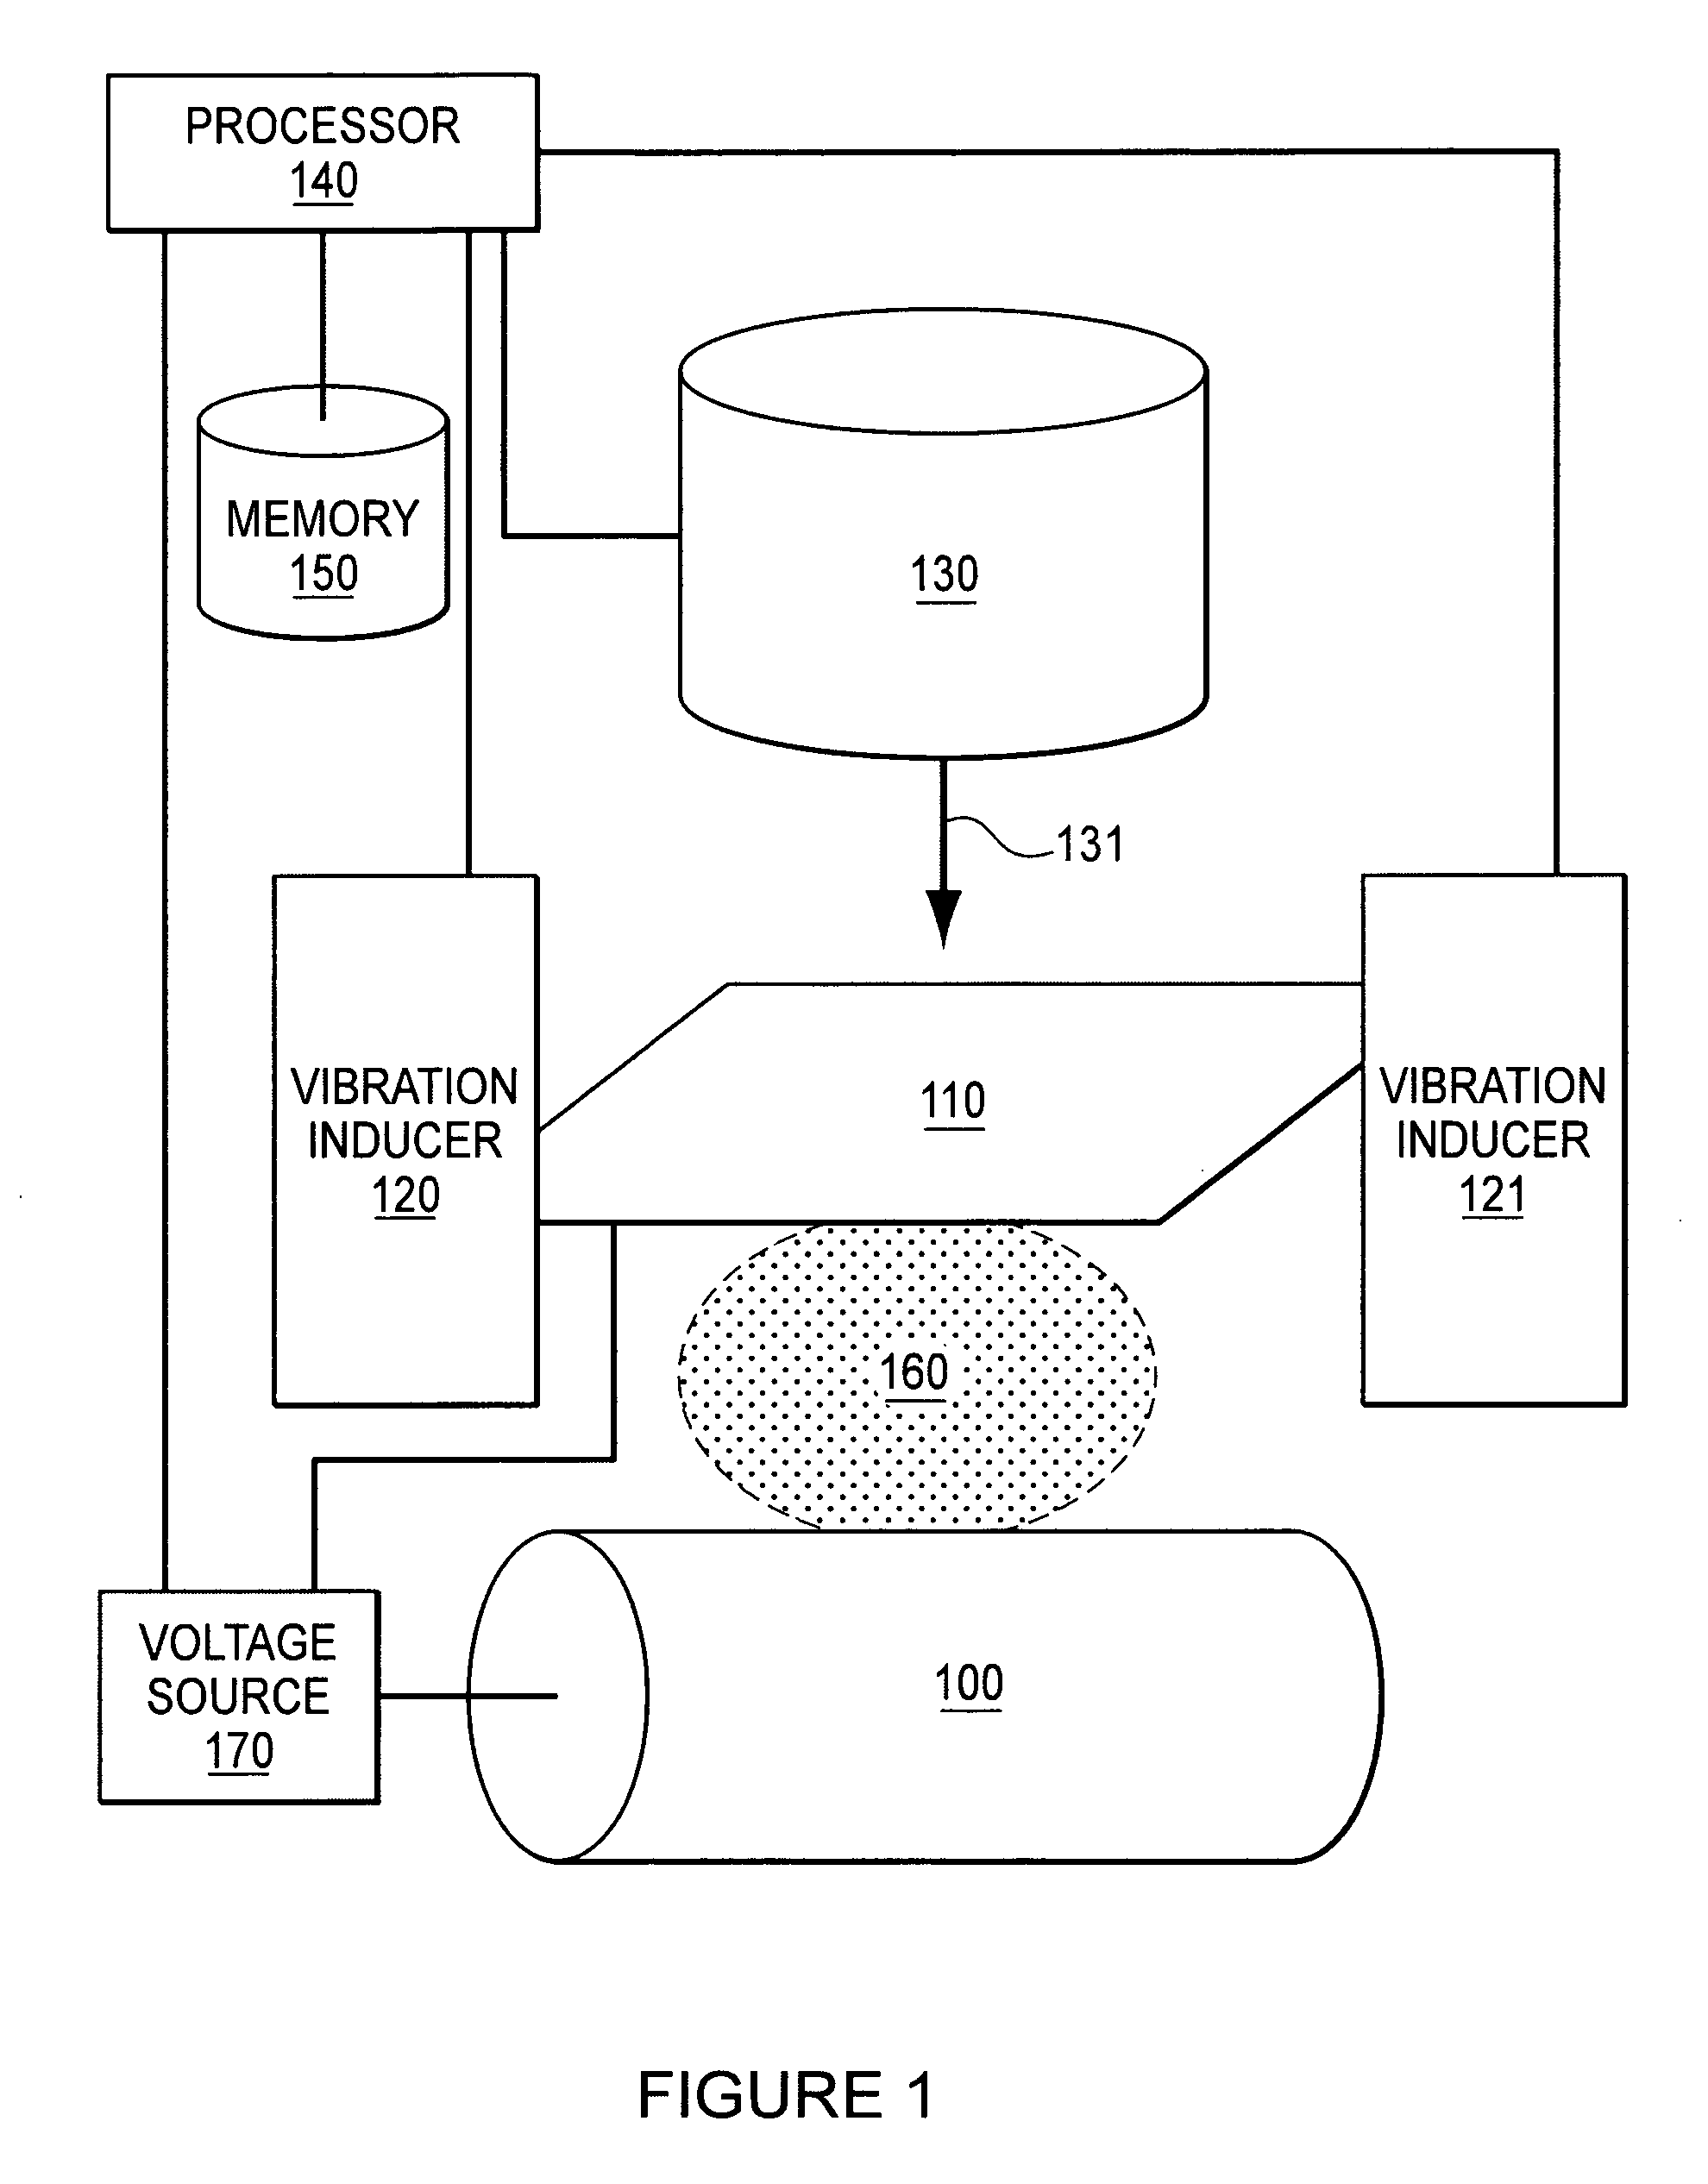 Method of coating a medical appliance utilizing a vibrating mesh nebulizer, a system for coating a medical appliance, and a medical appliance produced by the method